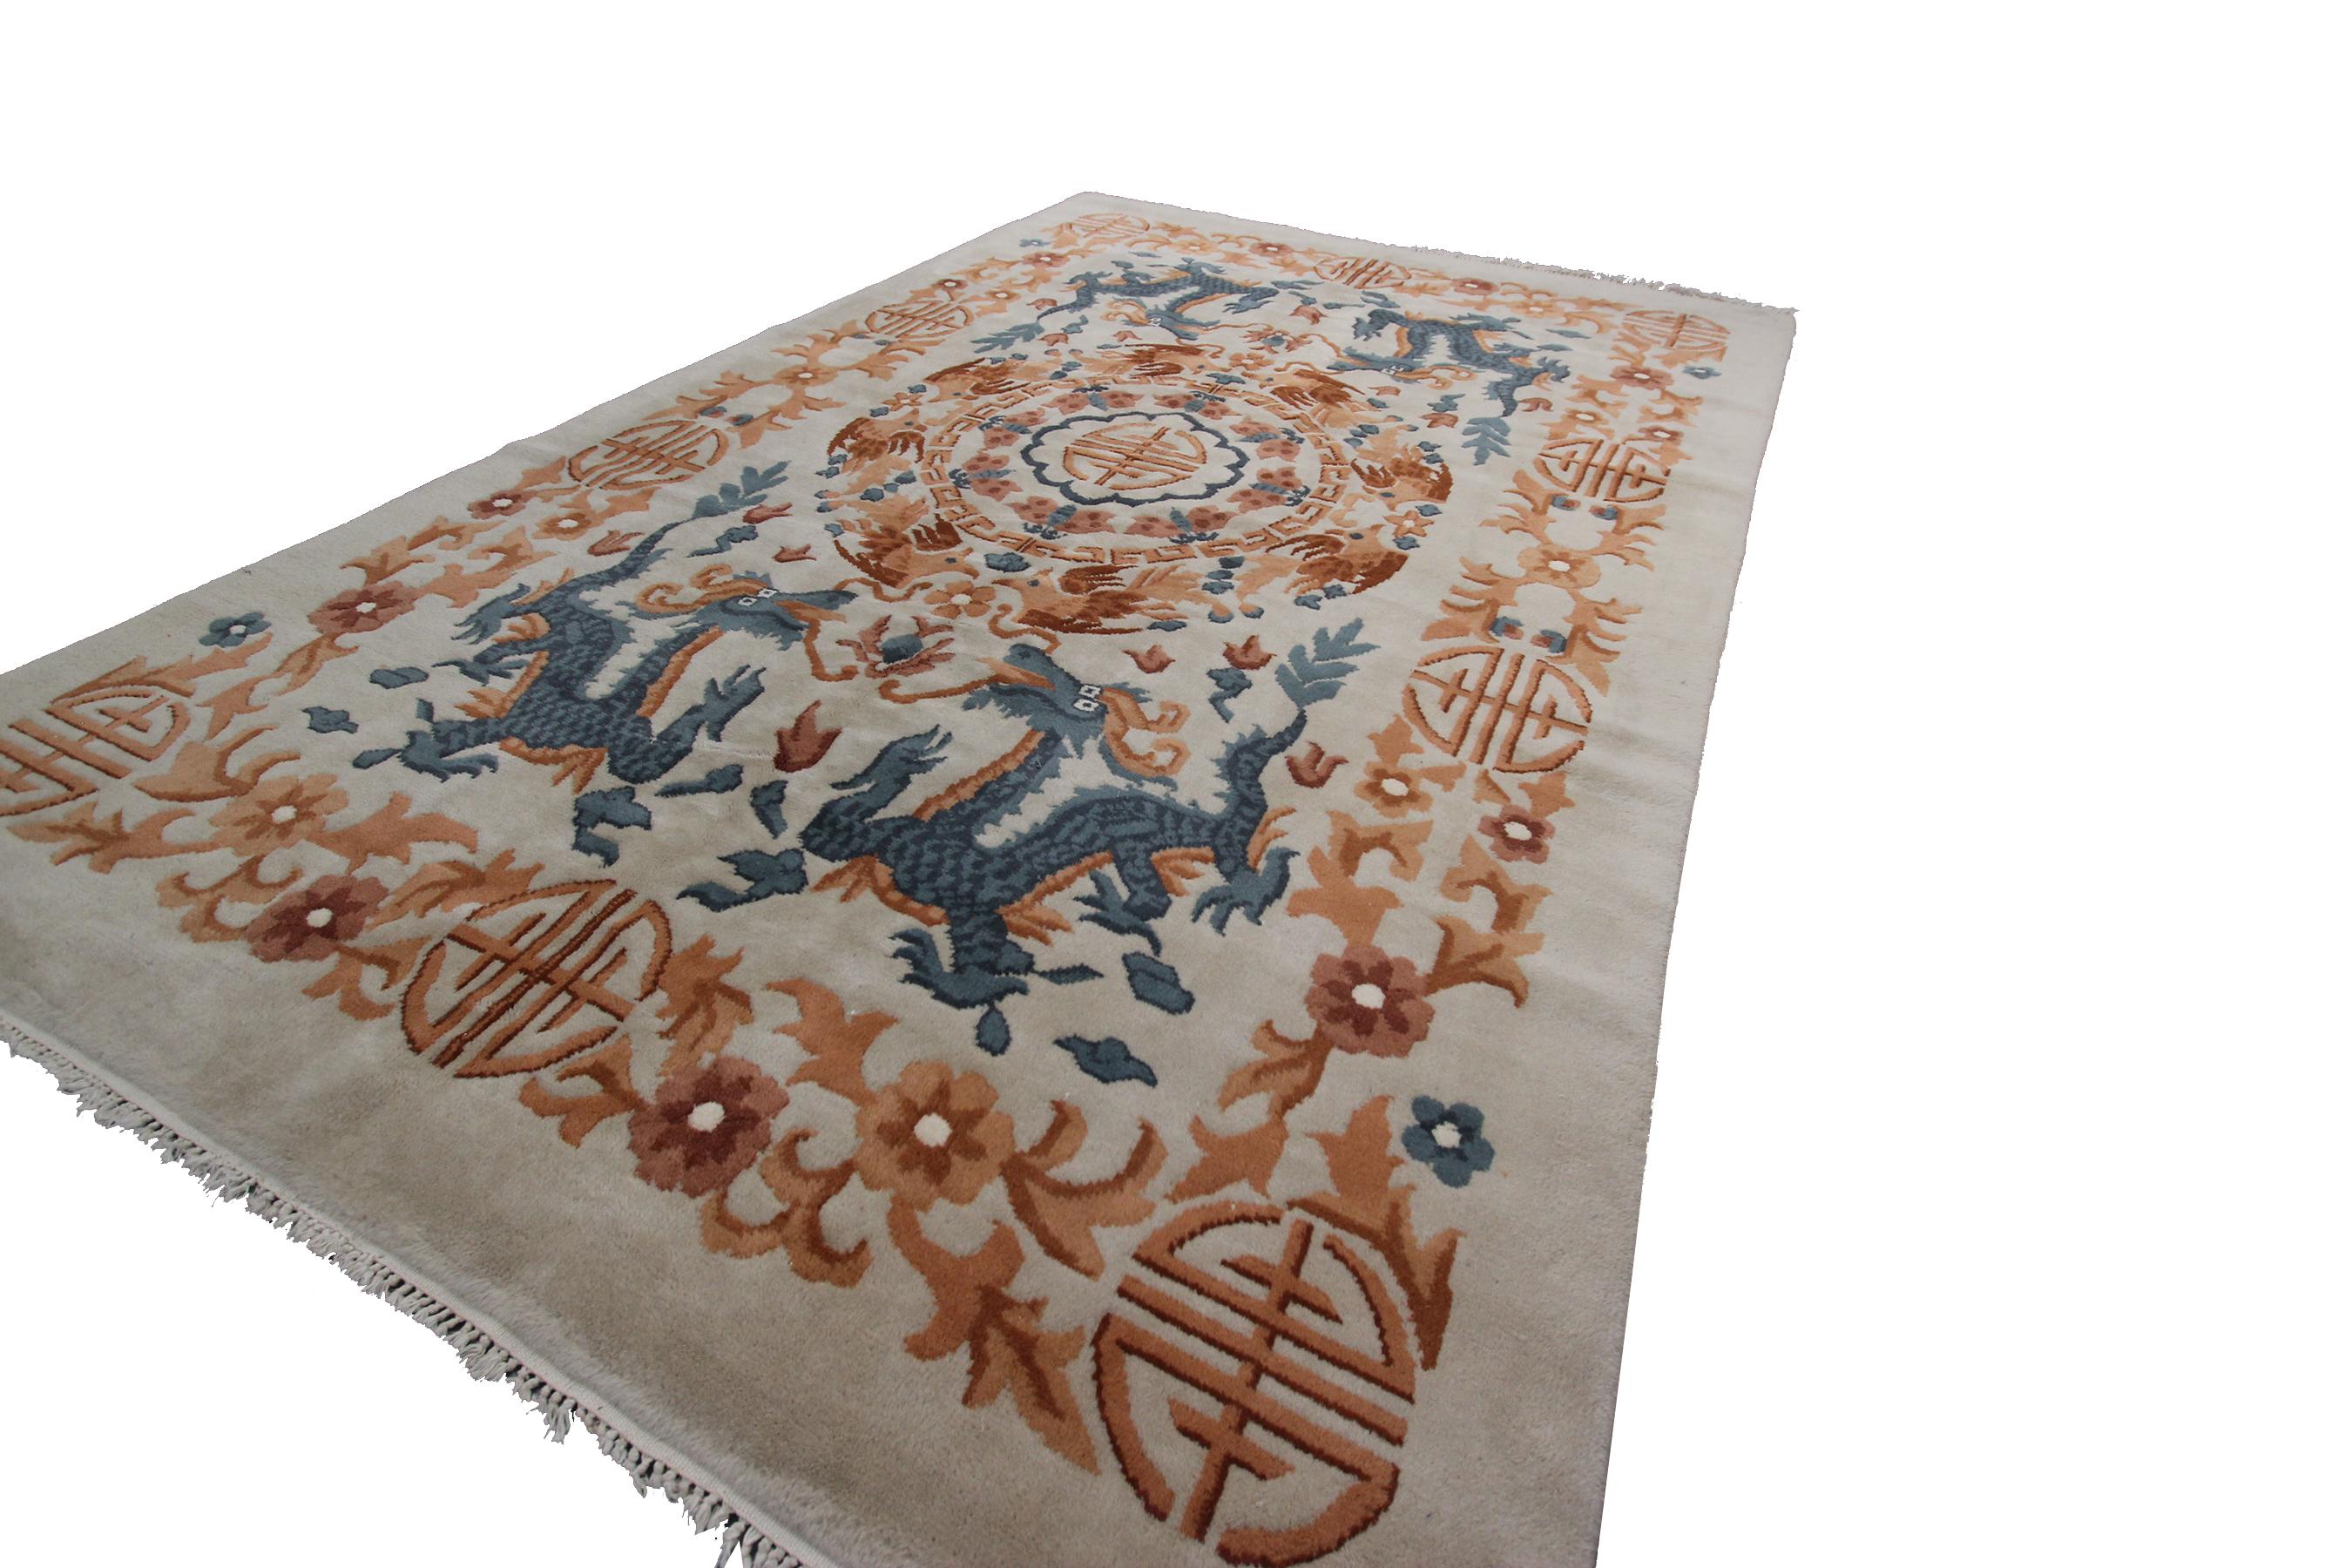 Vintage Chinese Art Deco Rug Geometric Chinese Rug Dragons 1960 For Sale 3